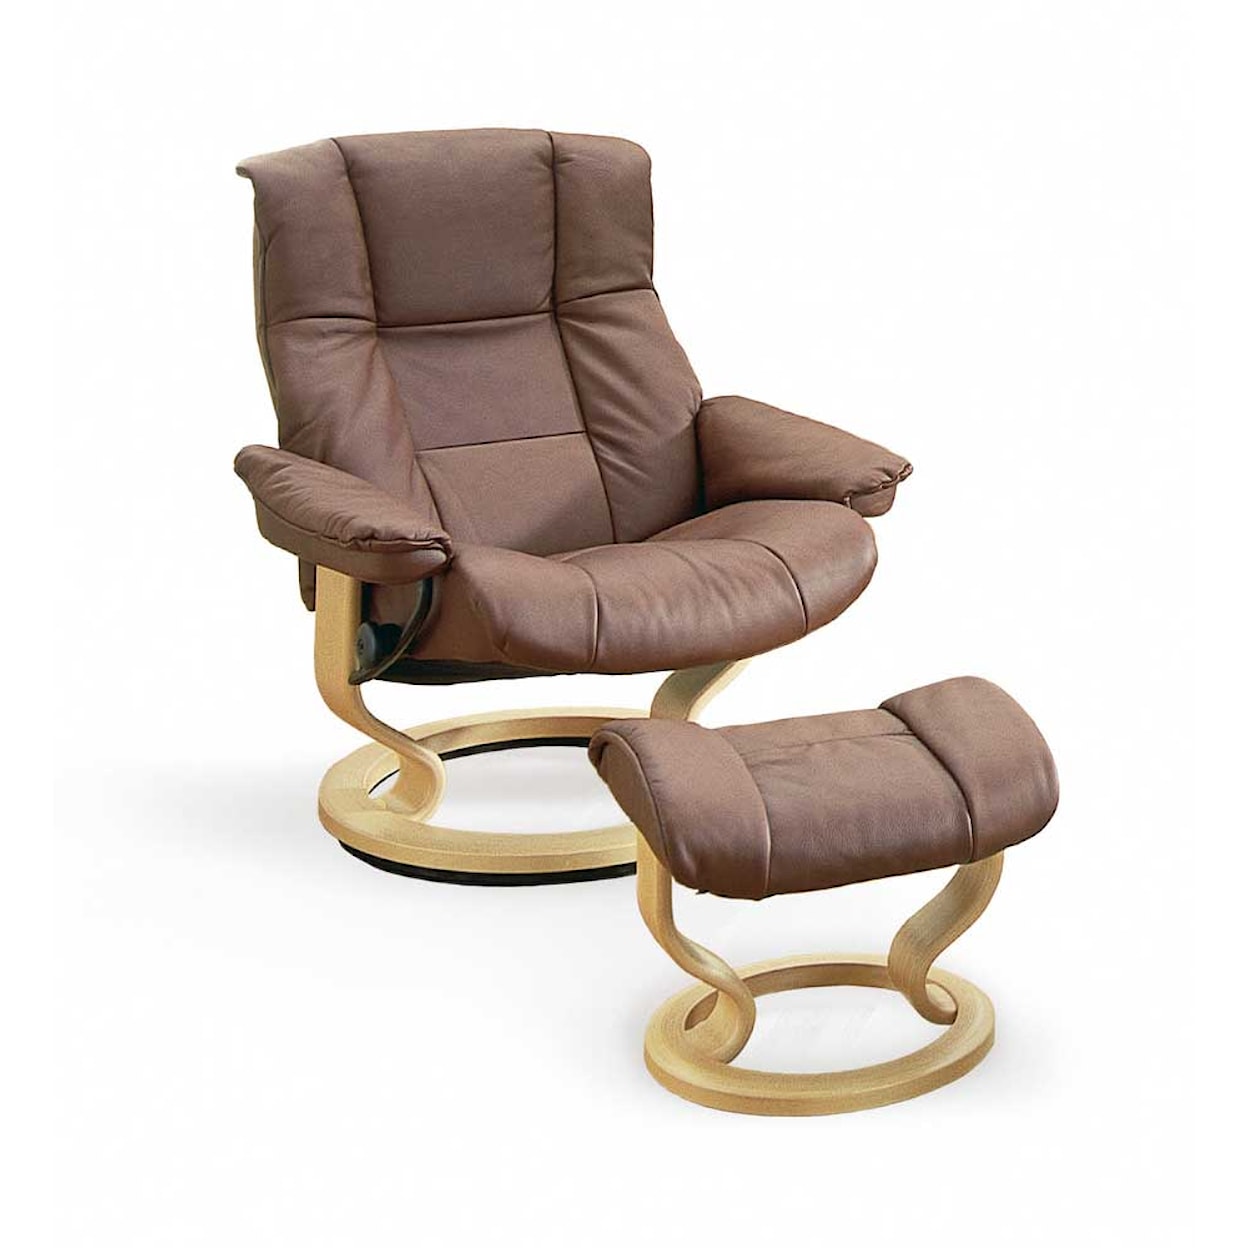 Stressless Mayfair Large Chair & Ottoman with Classic Base